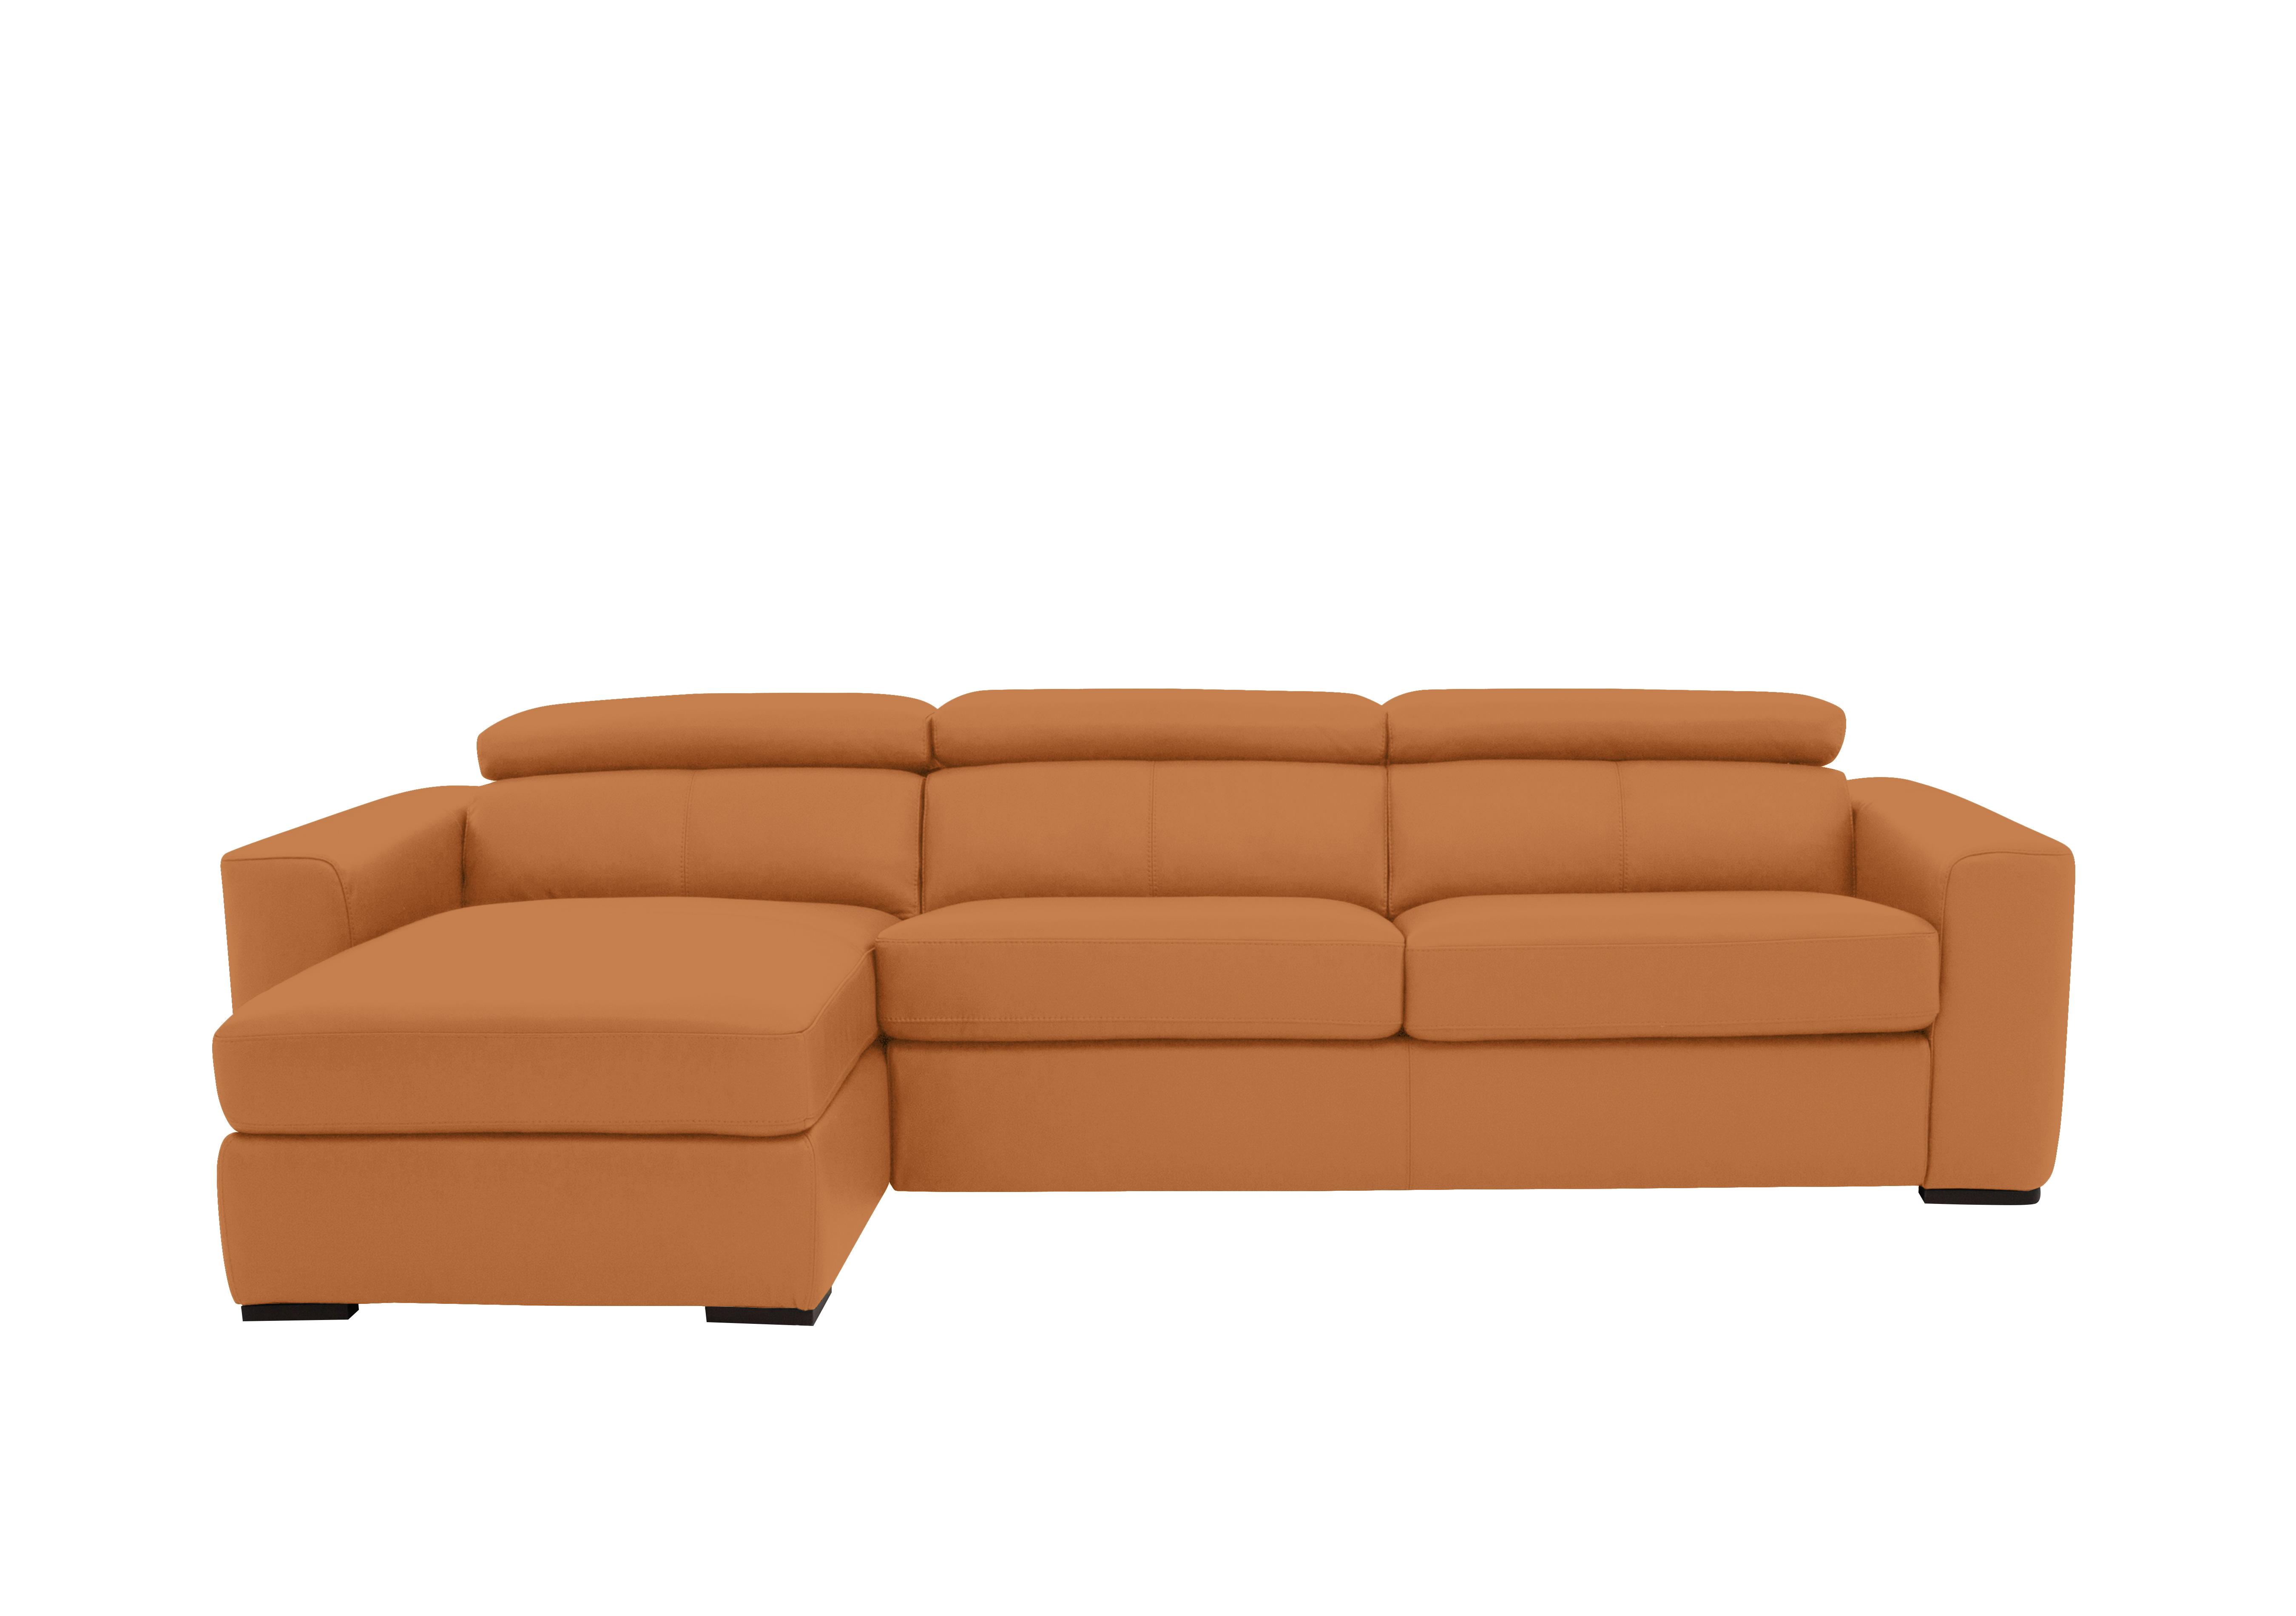 Infinity Leather Corner Chaise Sofabed with Storage in Bv-335e Honey Yellow on Furniture Village